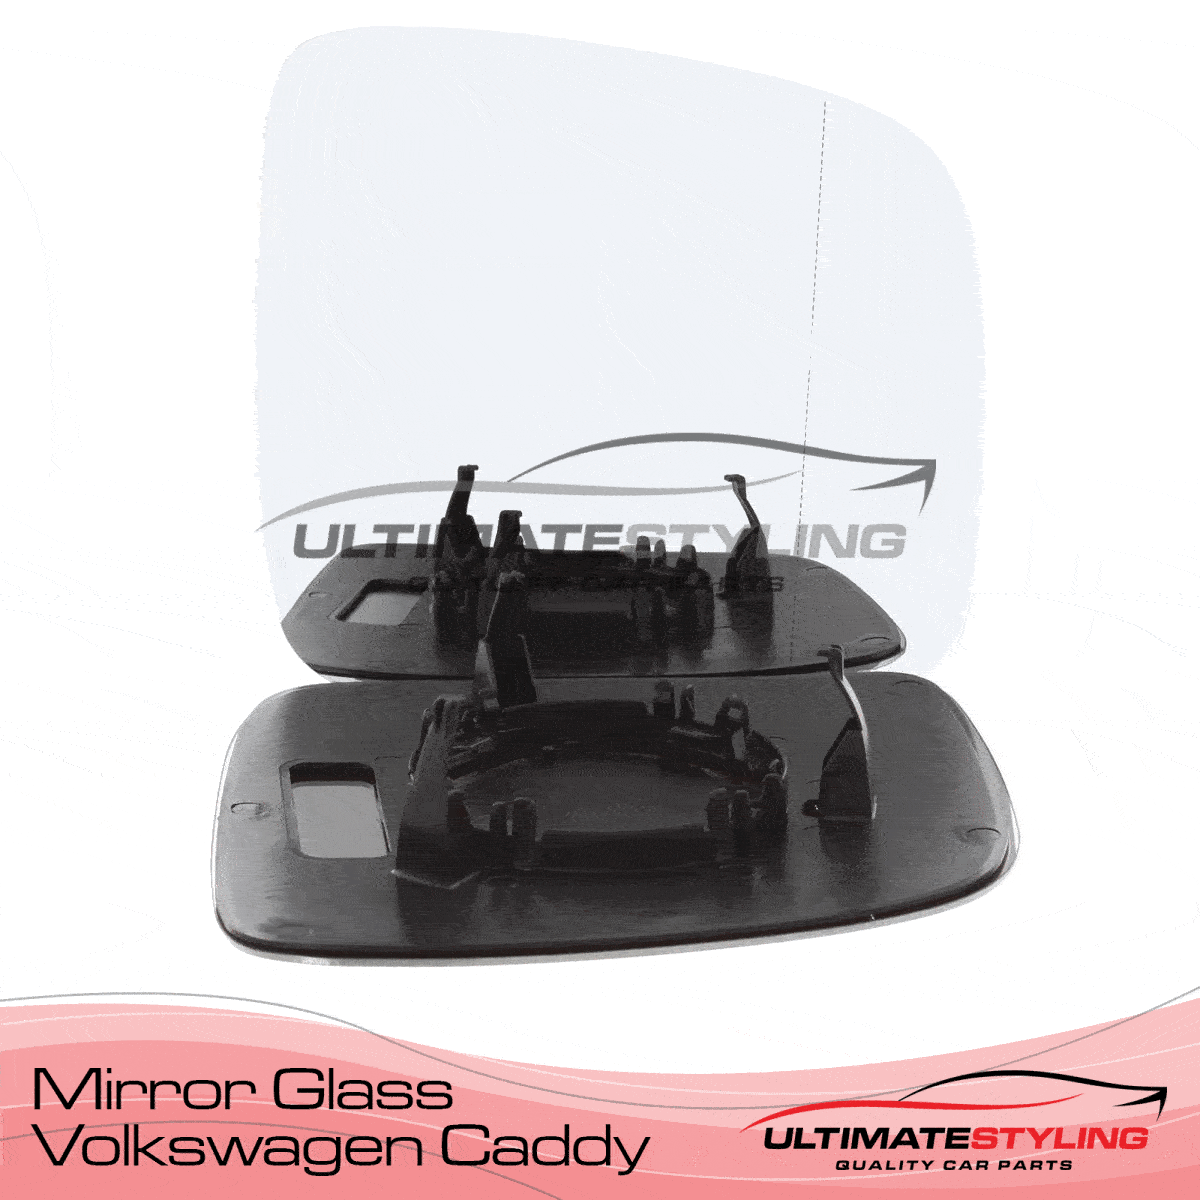 360 view of a VW Caddy wing mirror glass replacement